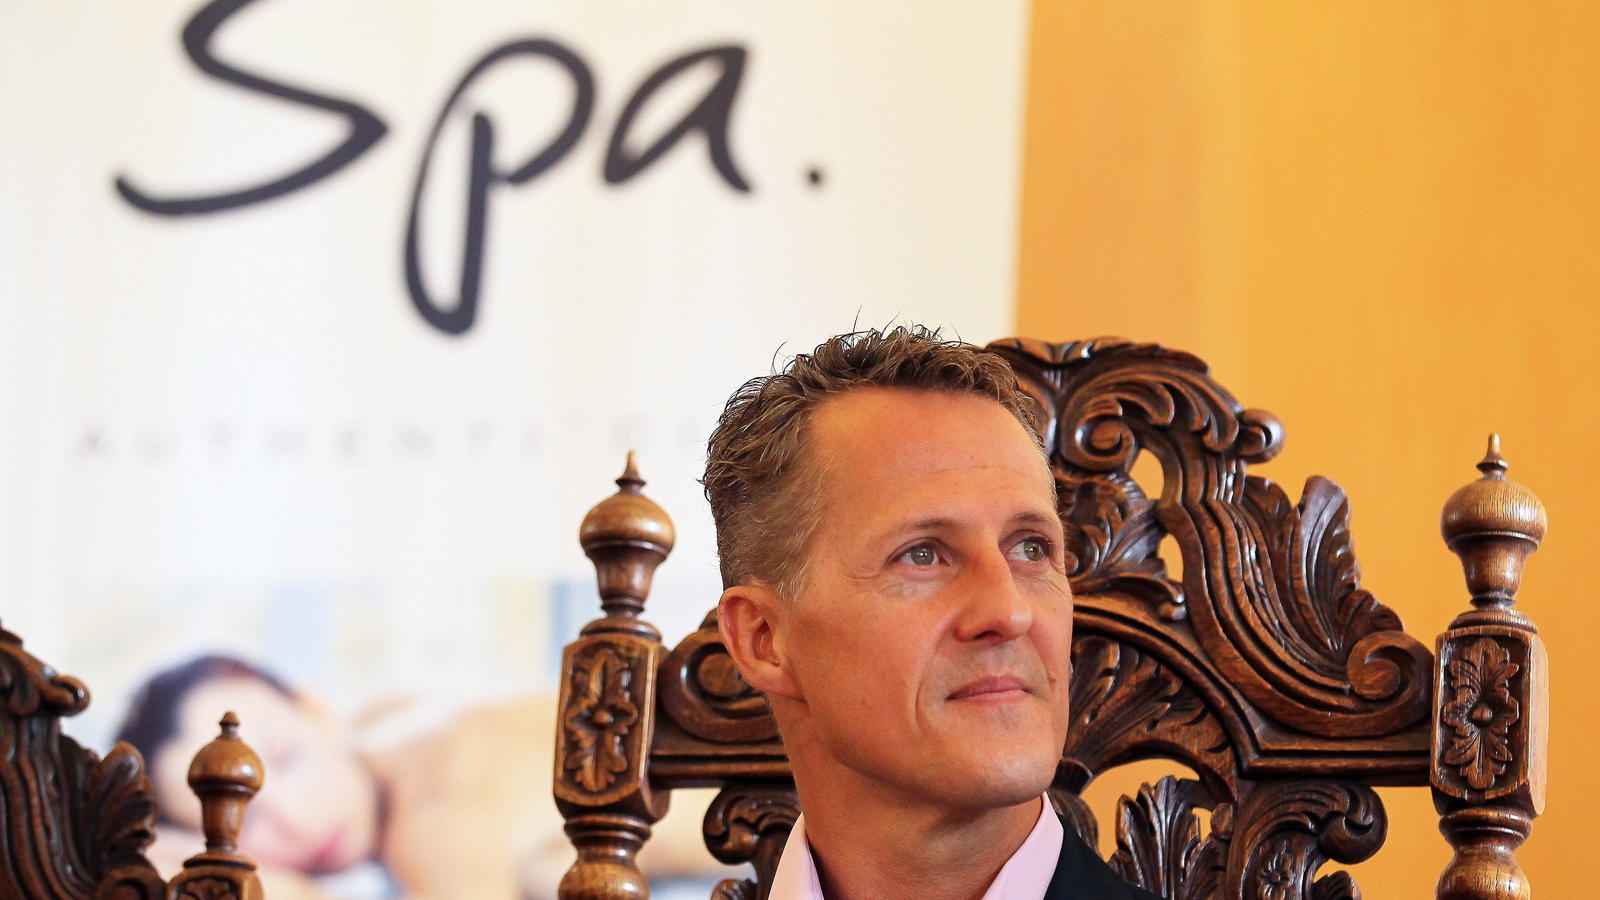 epa03374828 German Formula One driver Michael Schumacher of Mercedes AMG attends a ceremony to become honorary citizen of the city of Spa, Belgium, 30 August 2012. Michael Schumacher was appointed honorary citizen of the city of Spa in celebration of